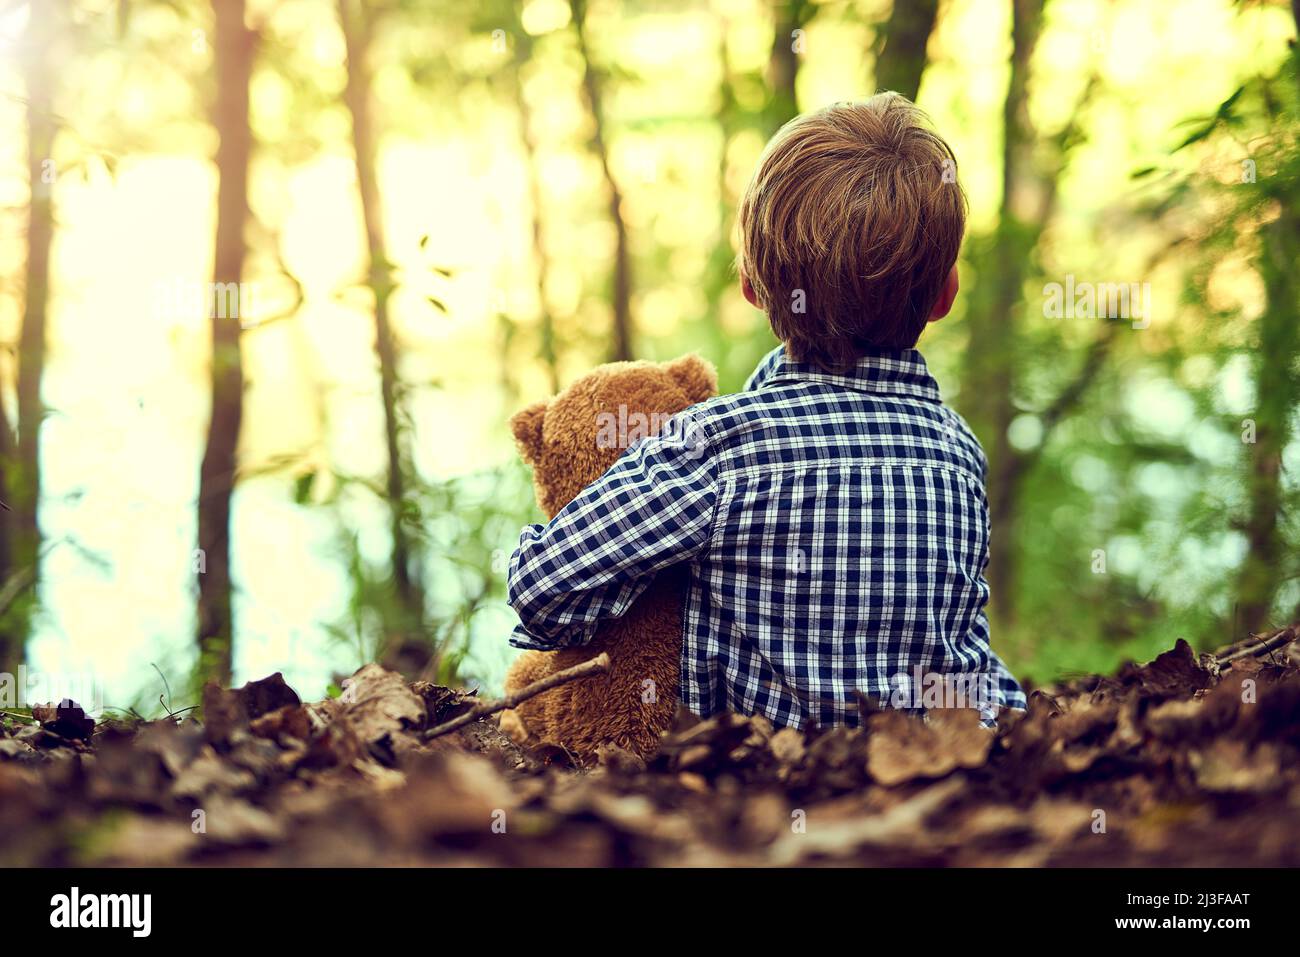 Teddy is always by my side. Shot of a little boy sitting in the forest with his teddy bear. Stock Photo